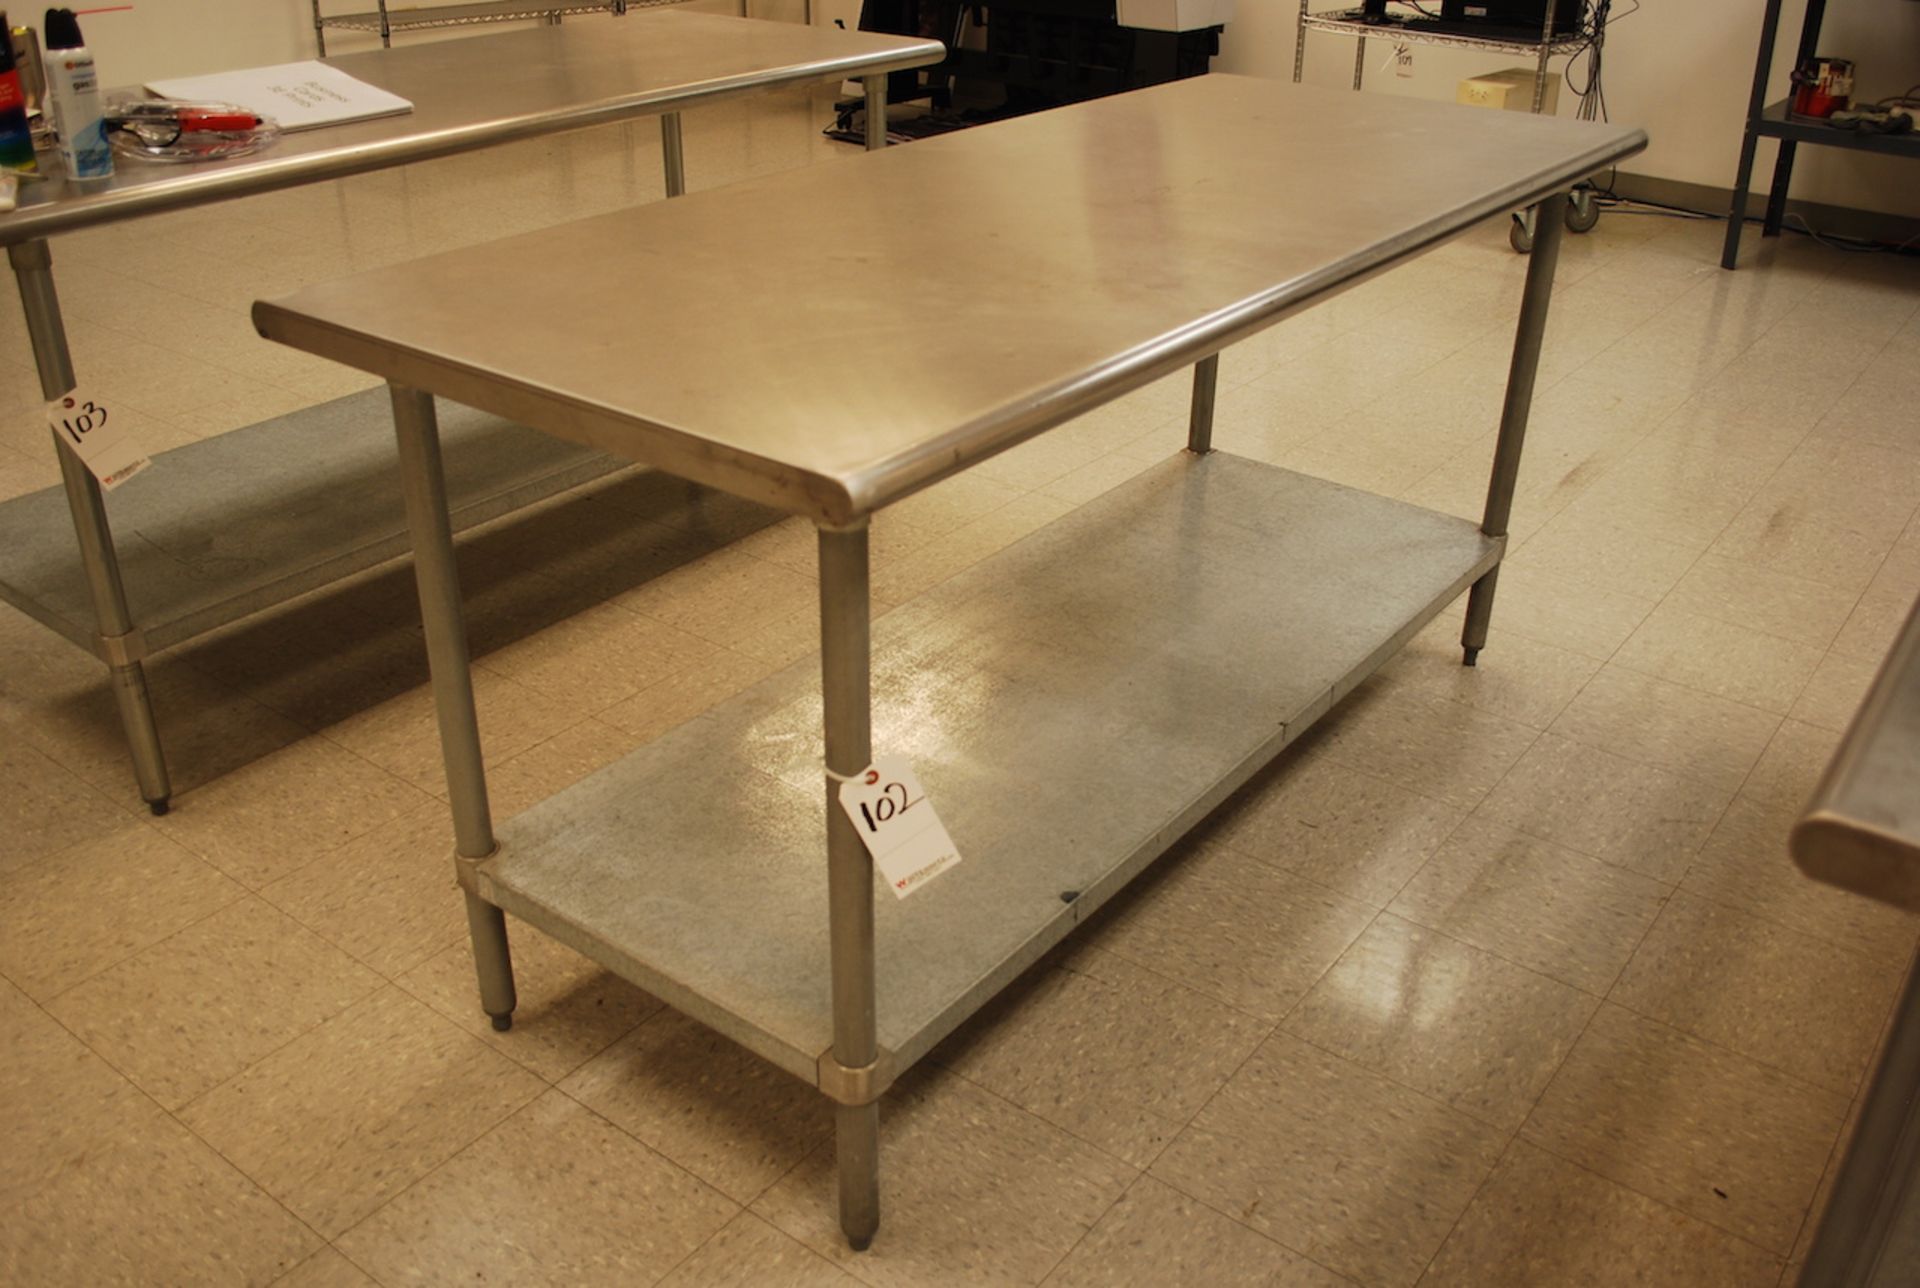 72" X 30" STAINLESS STEEL WORK BENCH